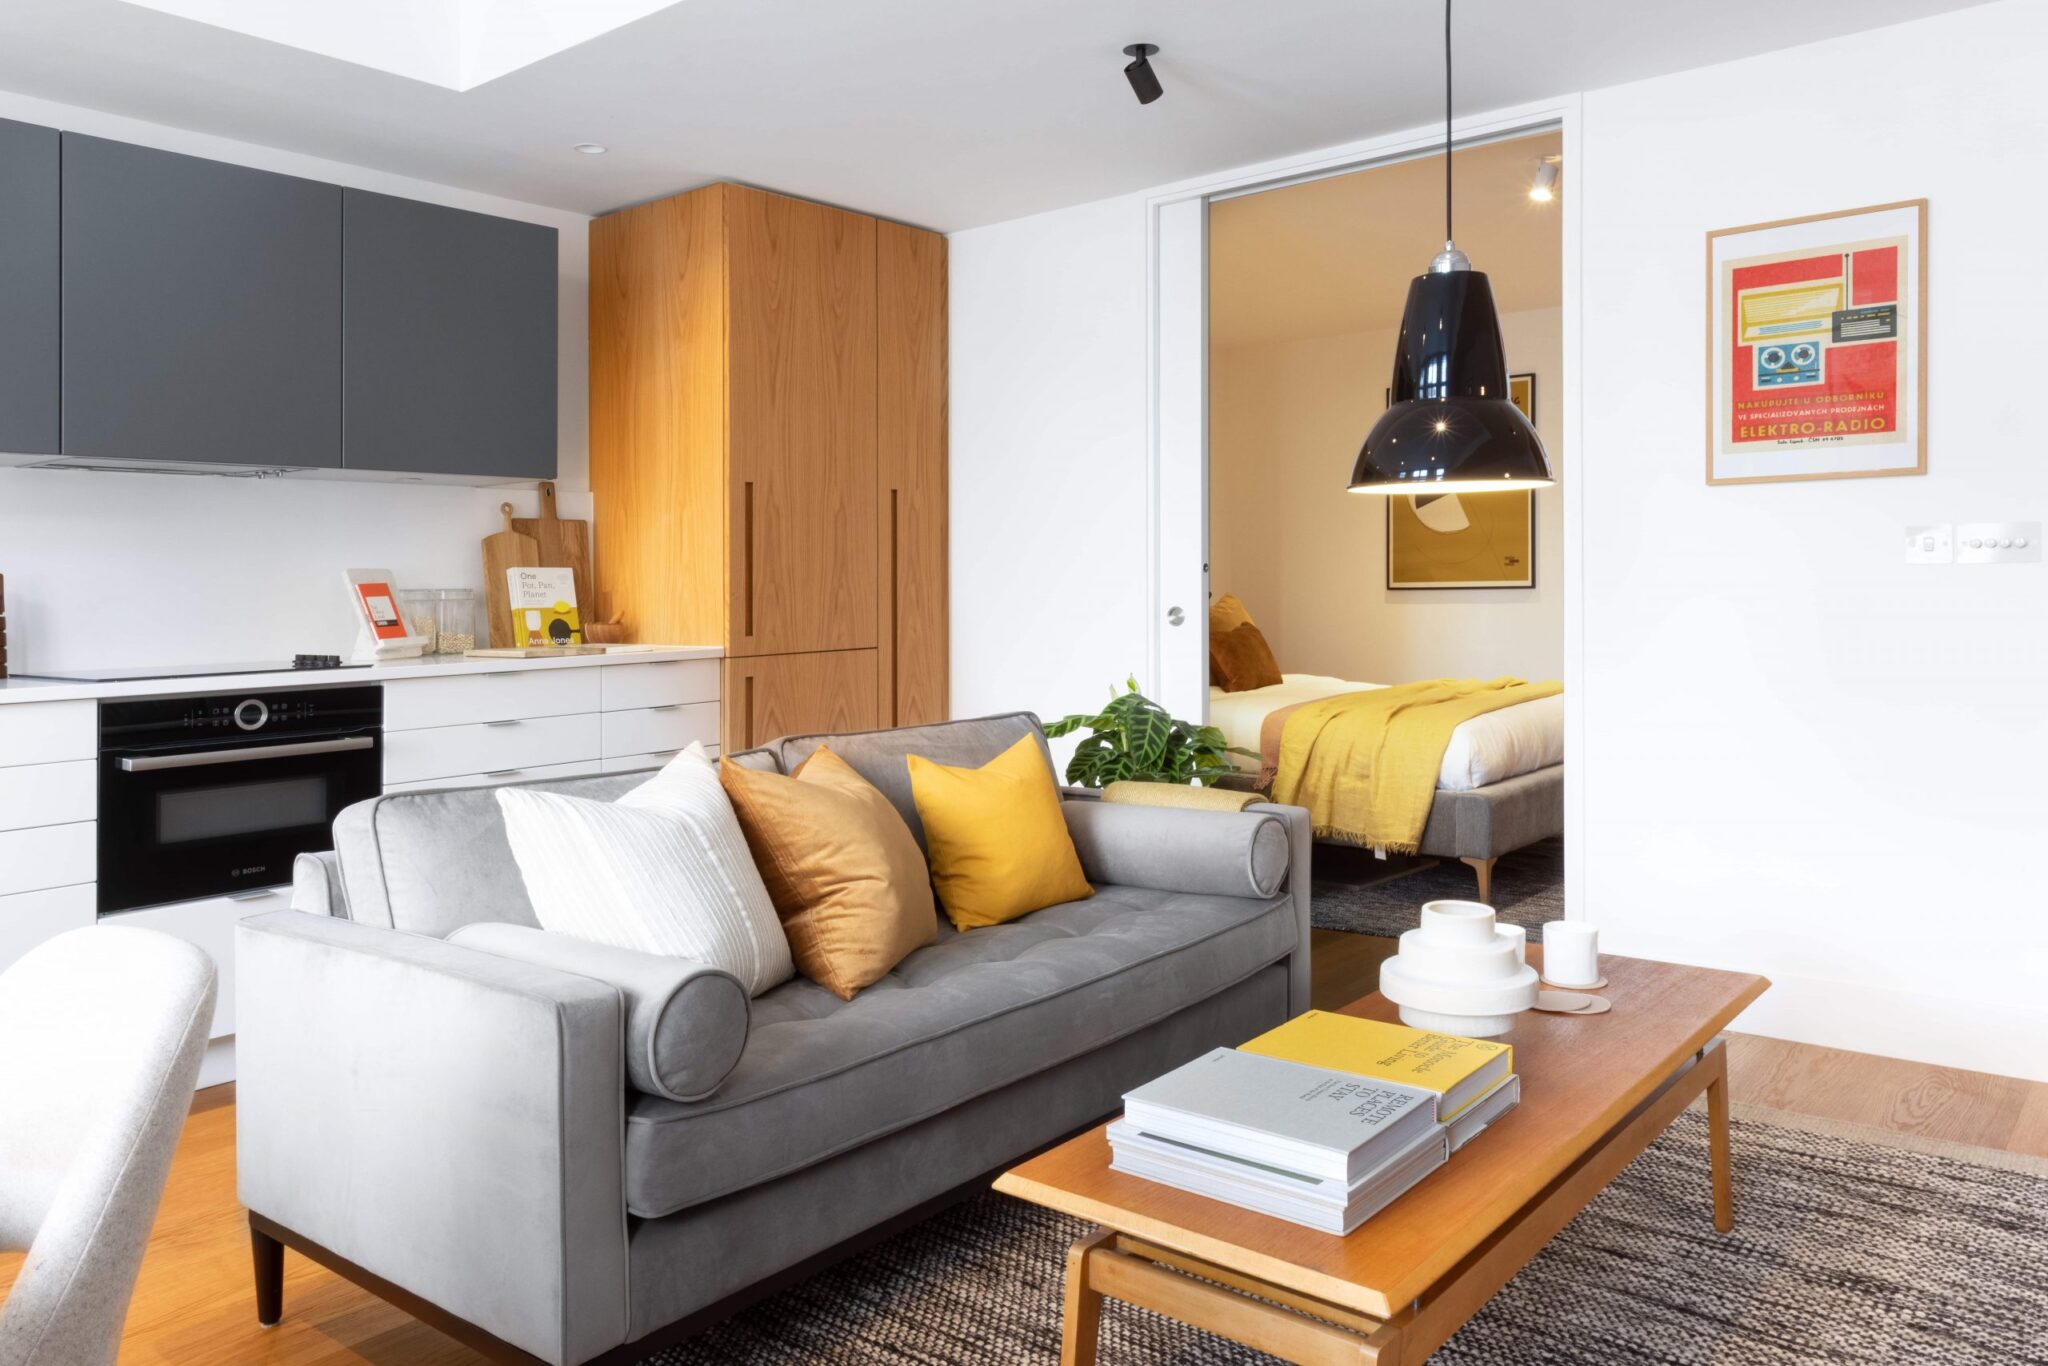 Luxury Apartments Marylebone available for short lets! Book The Marlo Serviced Accommodation Near Regents Park, Oxford Street and Soho now! urban Stay